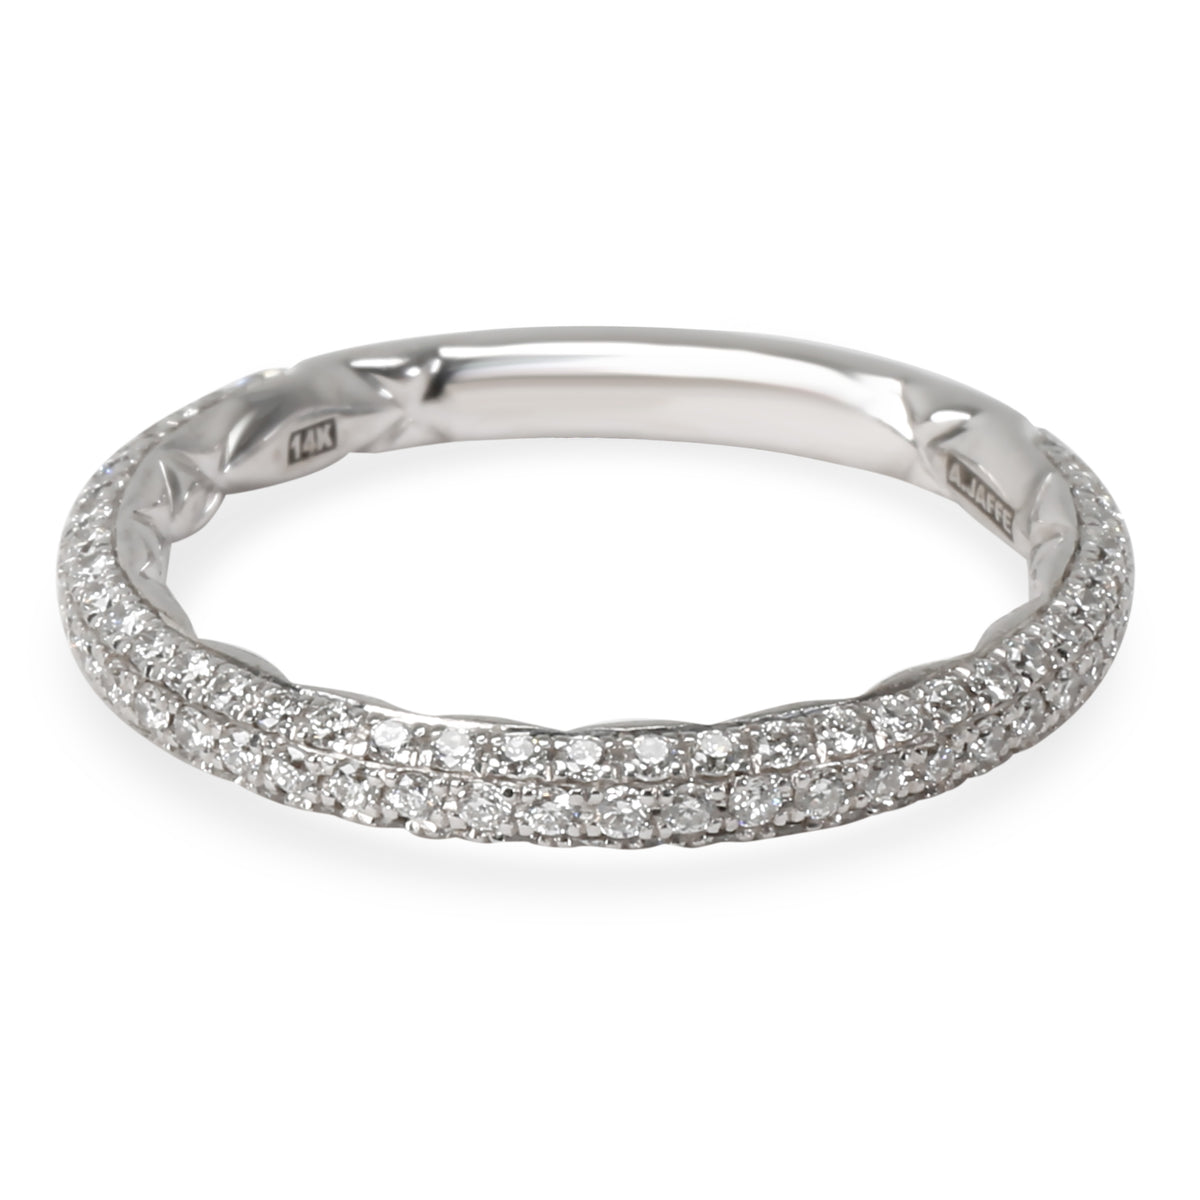 A. Jaffe Quilted Diamond Wedding Band in 14K White Gold (0.39 CTW)